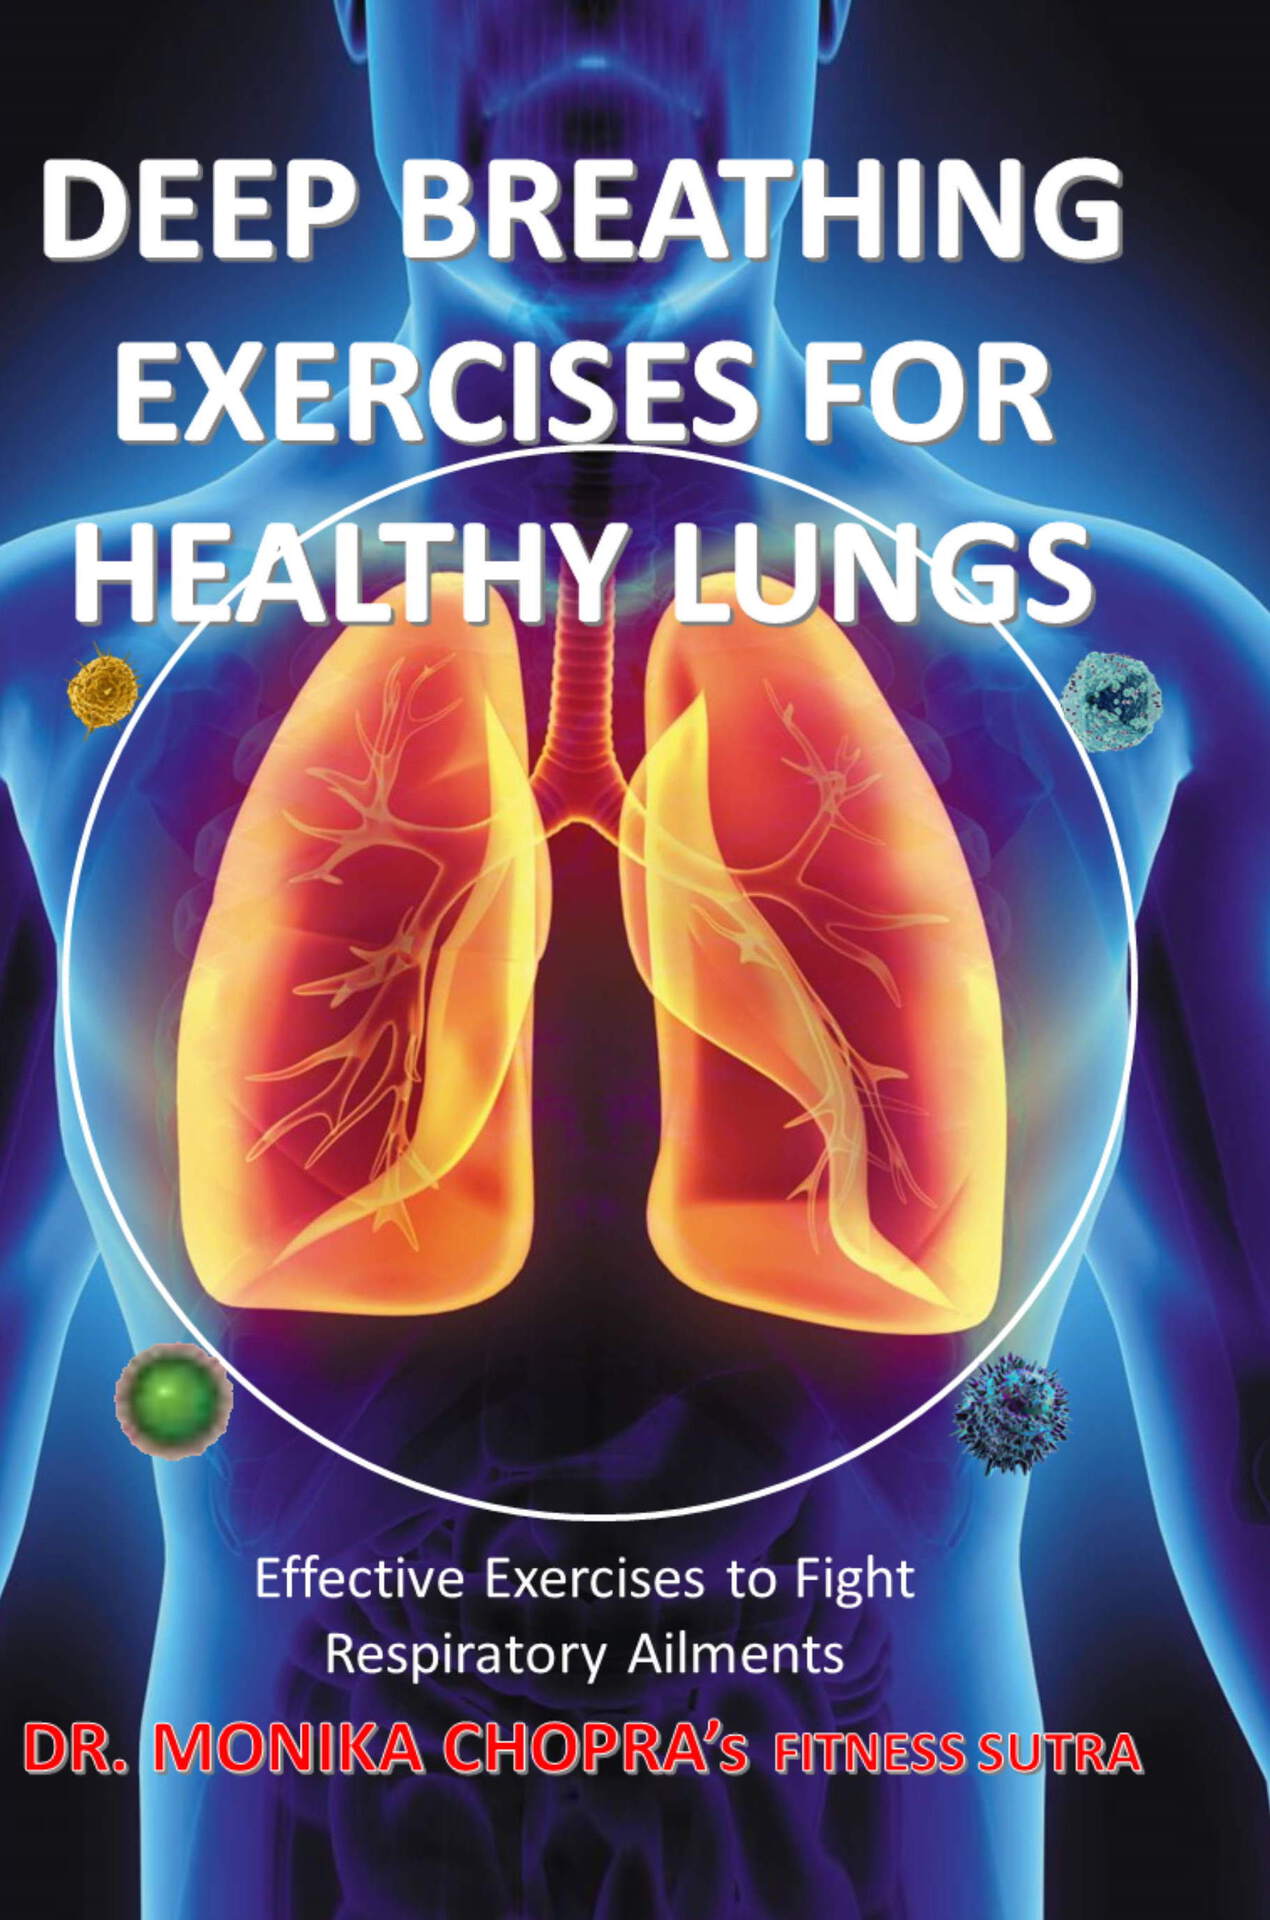 Deep Breathing Exercises For Healthy Lungs: Effective Exercises to Fight Respiratory Ailments (Fitness Sutra Book 5)